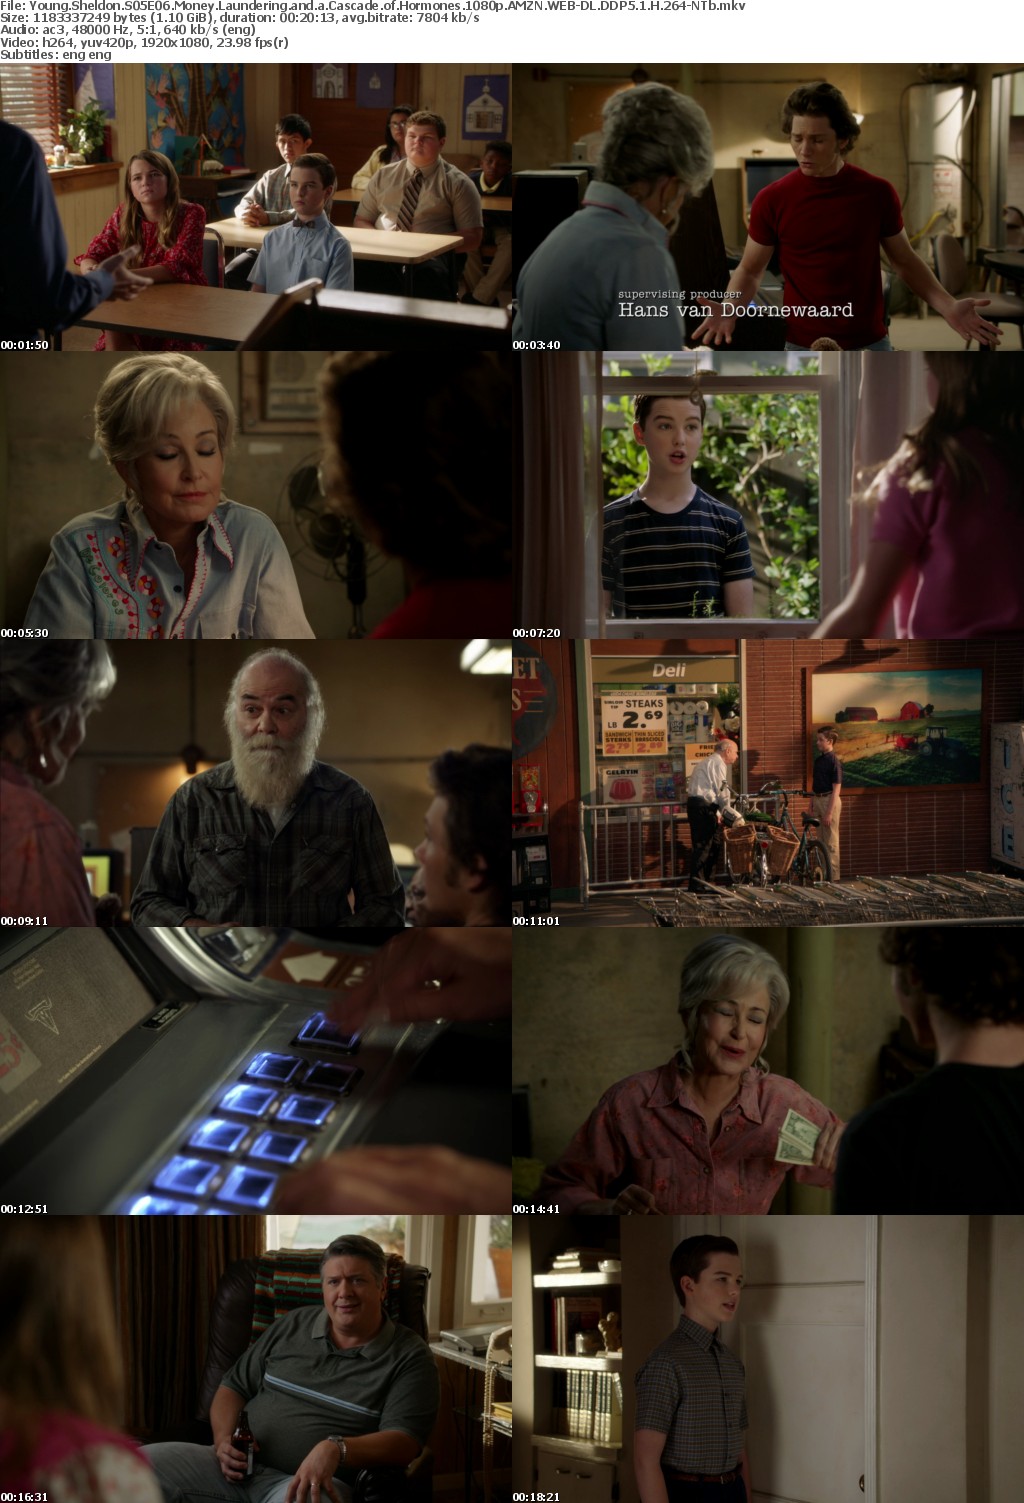 Young Sheldon S05E06 Money Laundering and a Cascade of Hormones 1080p AMZN WEB-DL DDP5 1 H 264-NTb